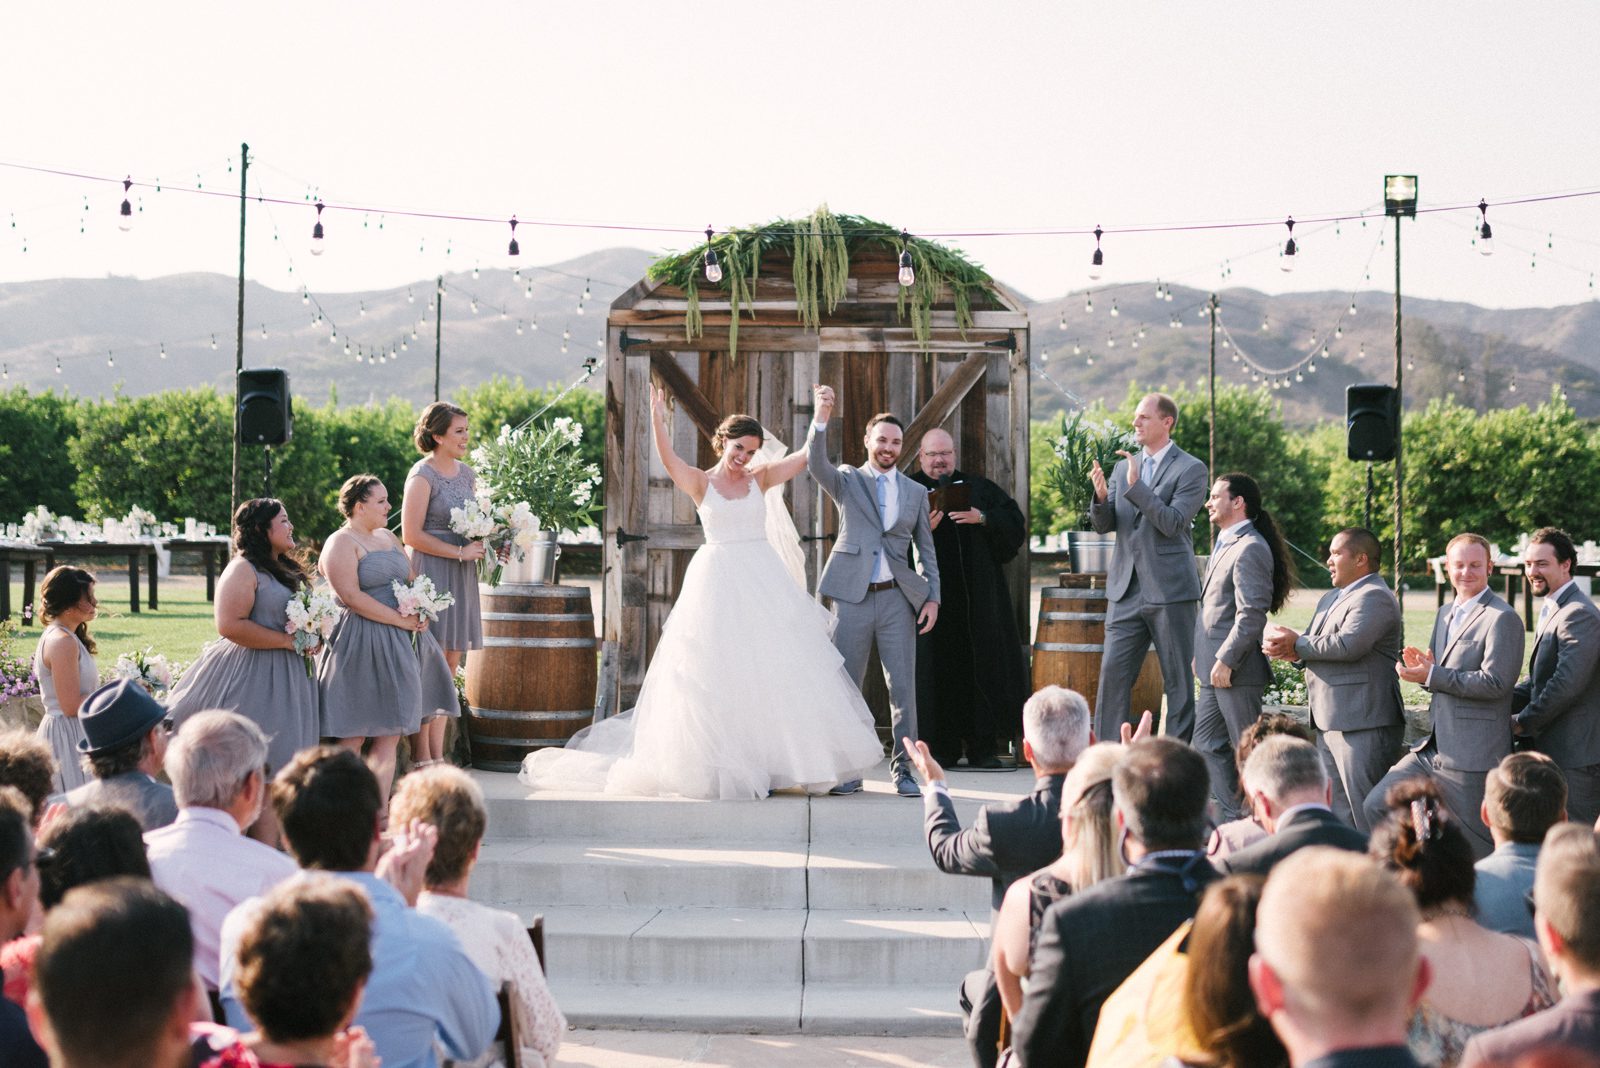 Bride and groom celebrating during ceremony at Limoneira Ranch Wedding by San Luis Obispo Wedding Photographer Yvonne Goll Photography